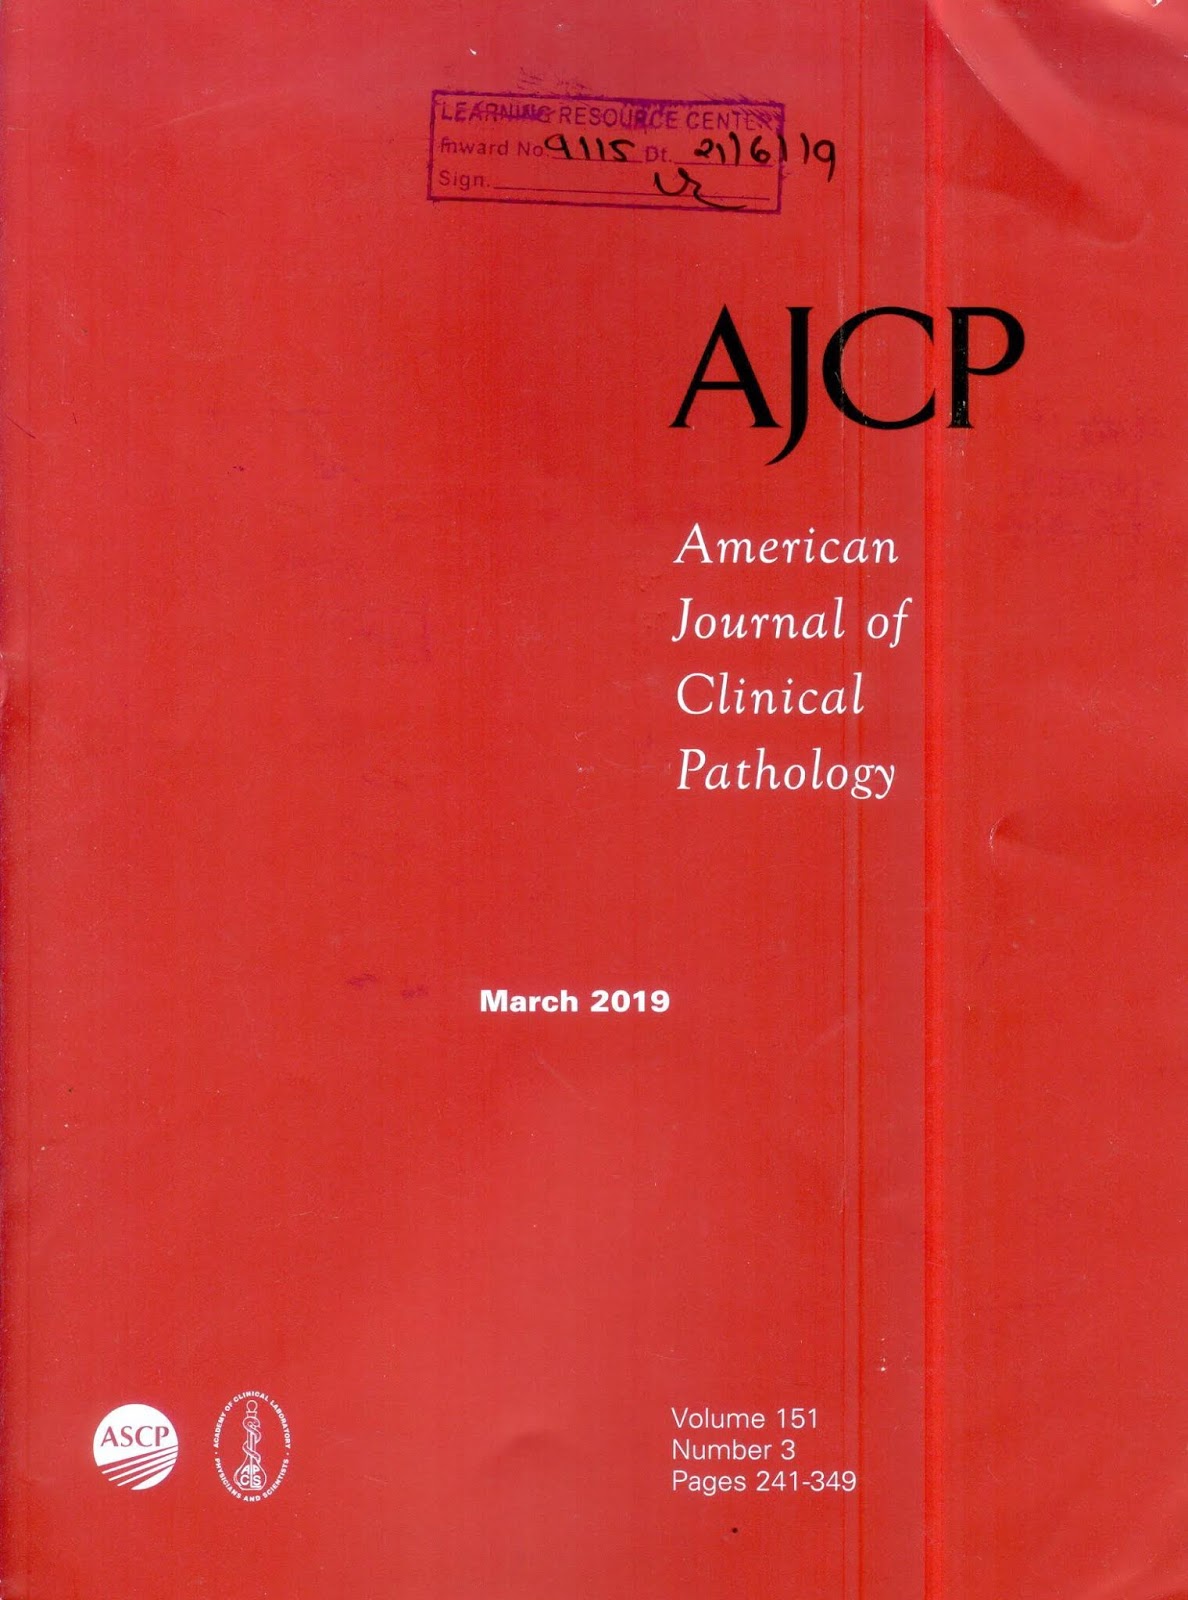 https://academic.oup.com/ajcp/issue/151/3